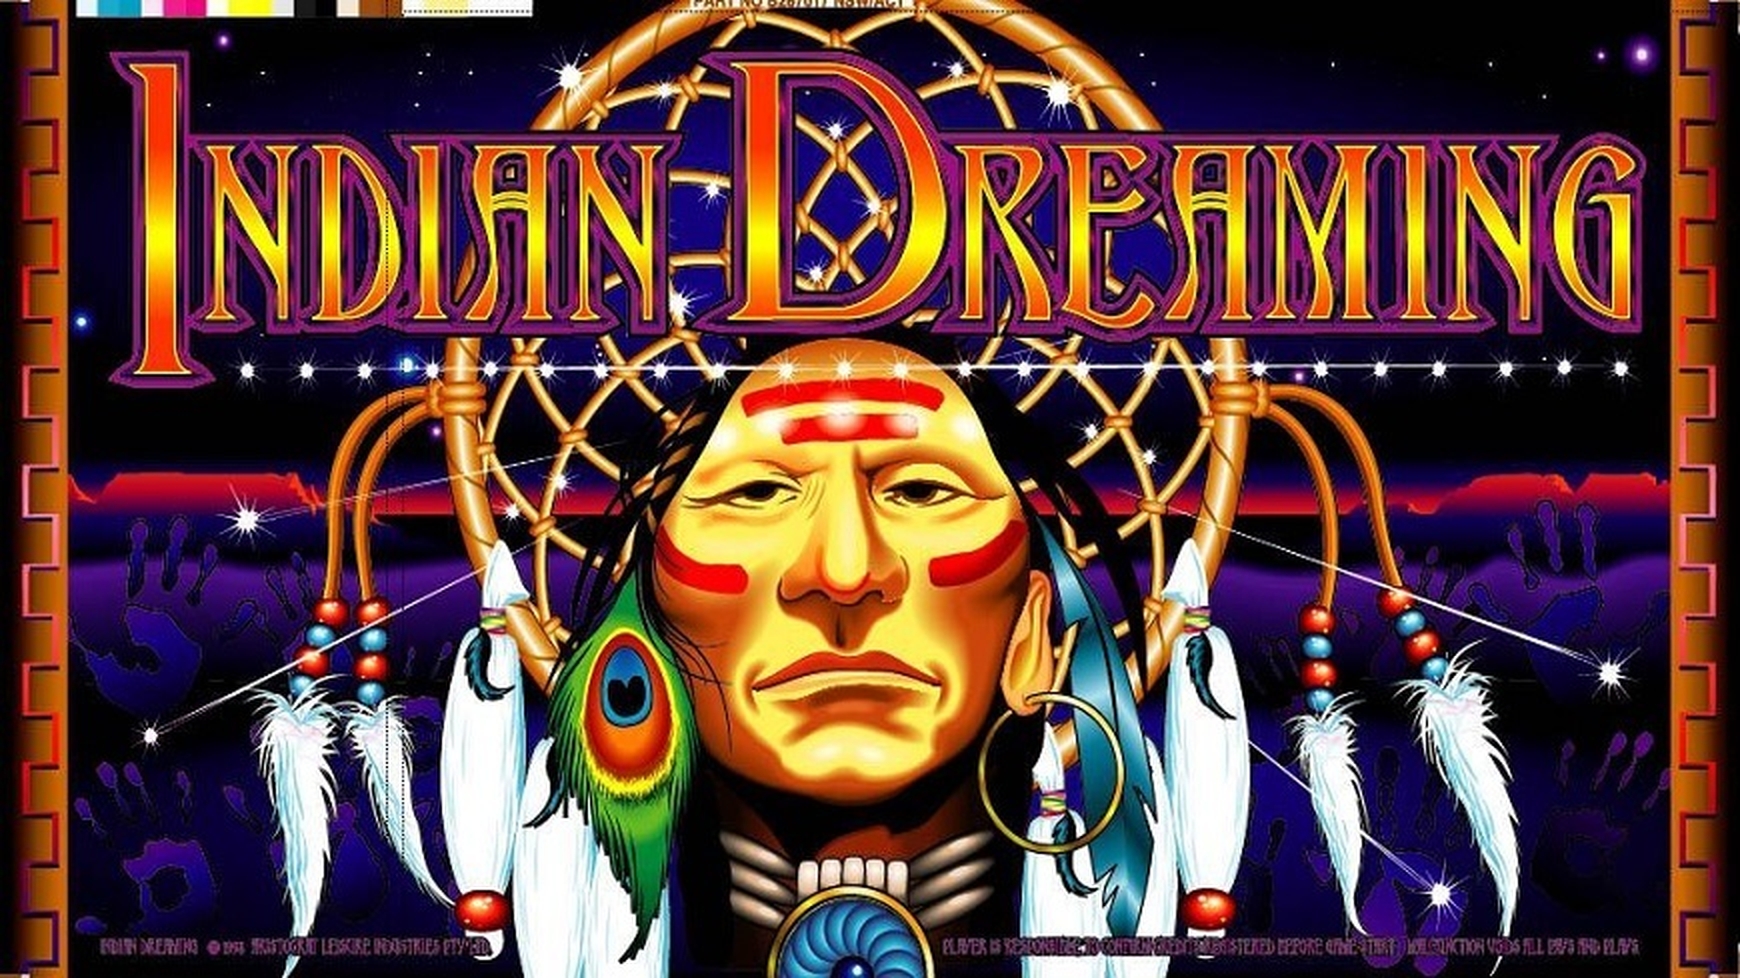 The Indian Dreaming Online Slot Demo Game by Aristocrat